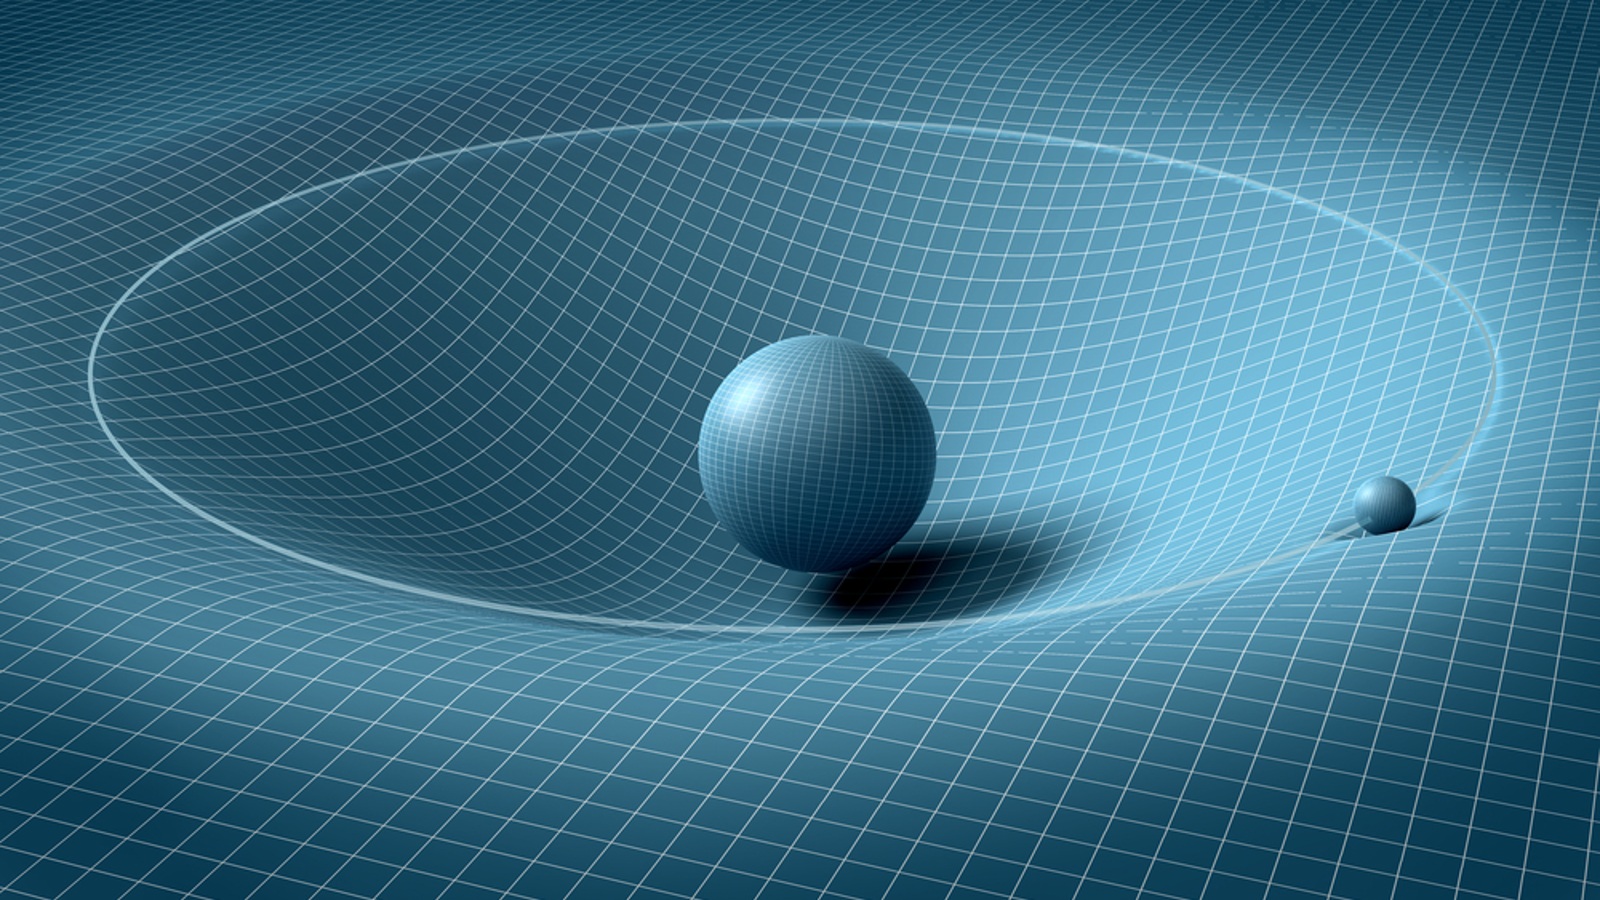 Space time bending around a planet due to gravity